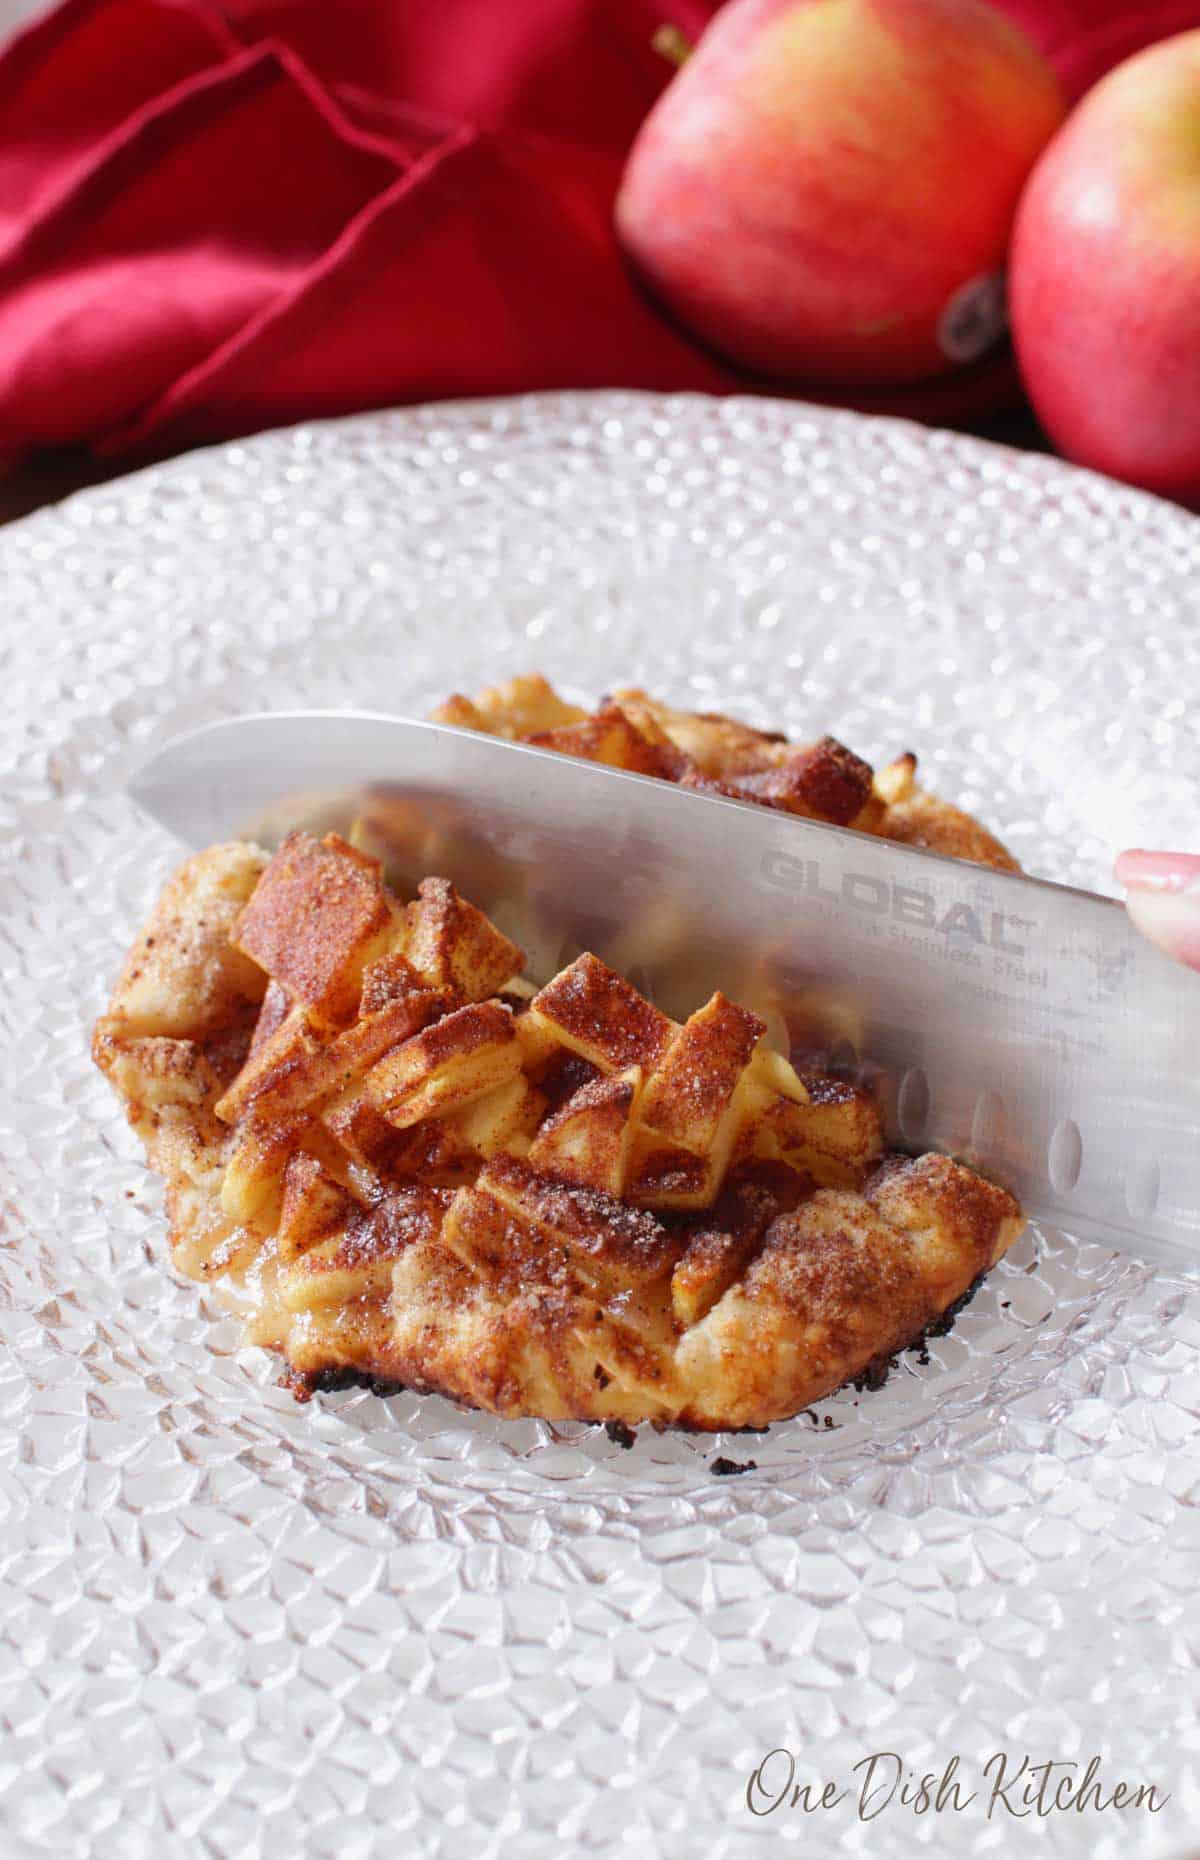 A knife cutting into an apple galette topped with cinnamon and sugar plated with apples and a red cloth napkin in the background.